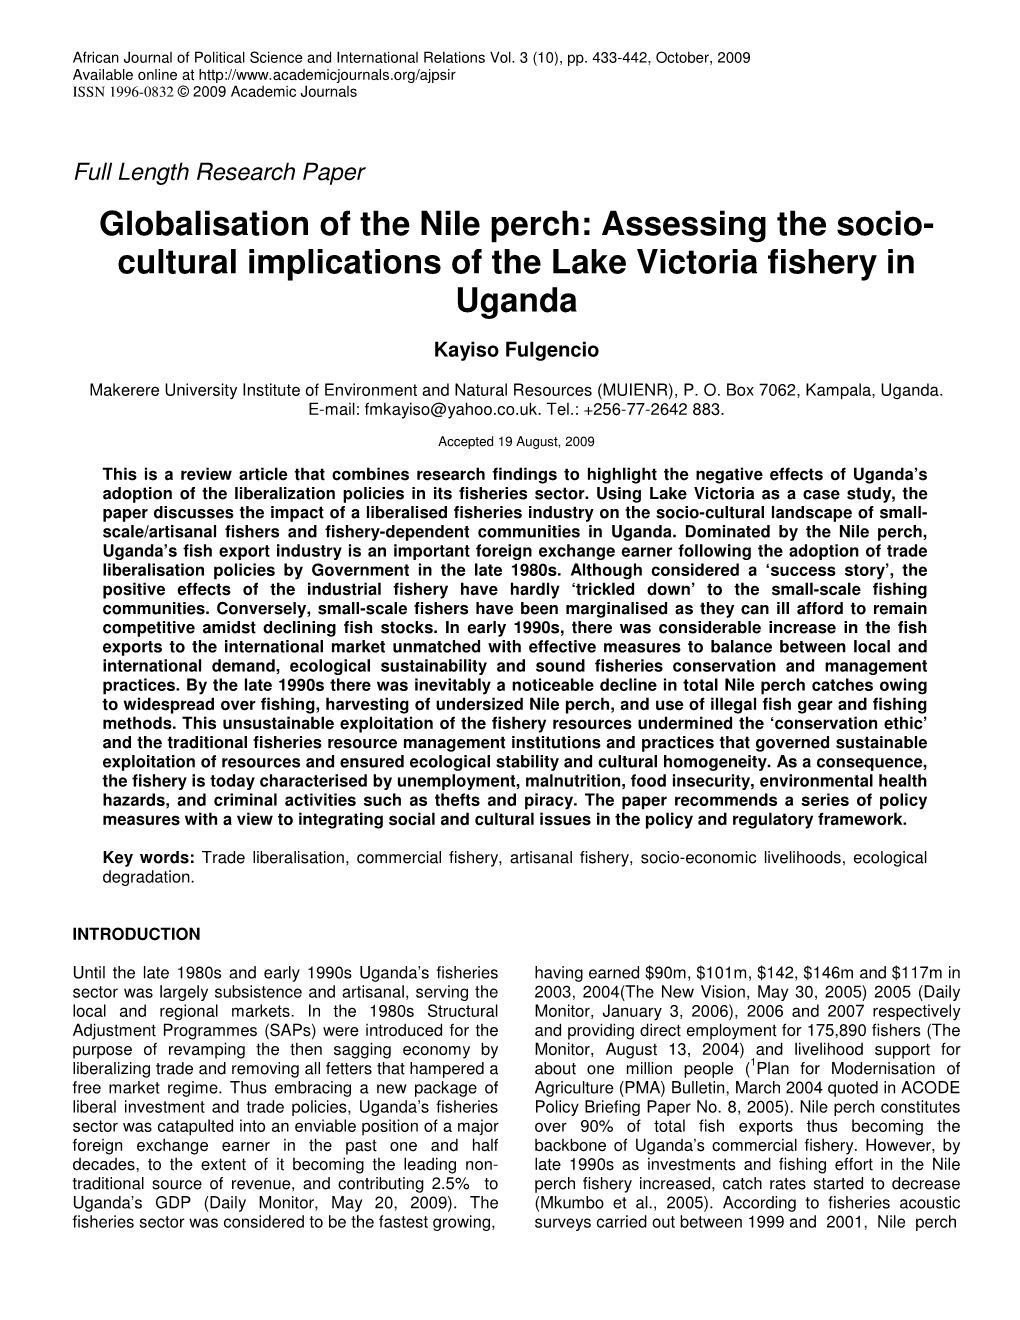 Globalisation of the Nile Perch: Assessing the Socio- Cultural Implications of the Lake Victoria Fishery in Uganda